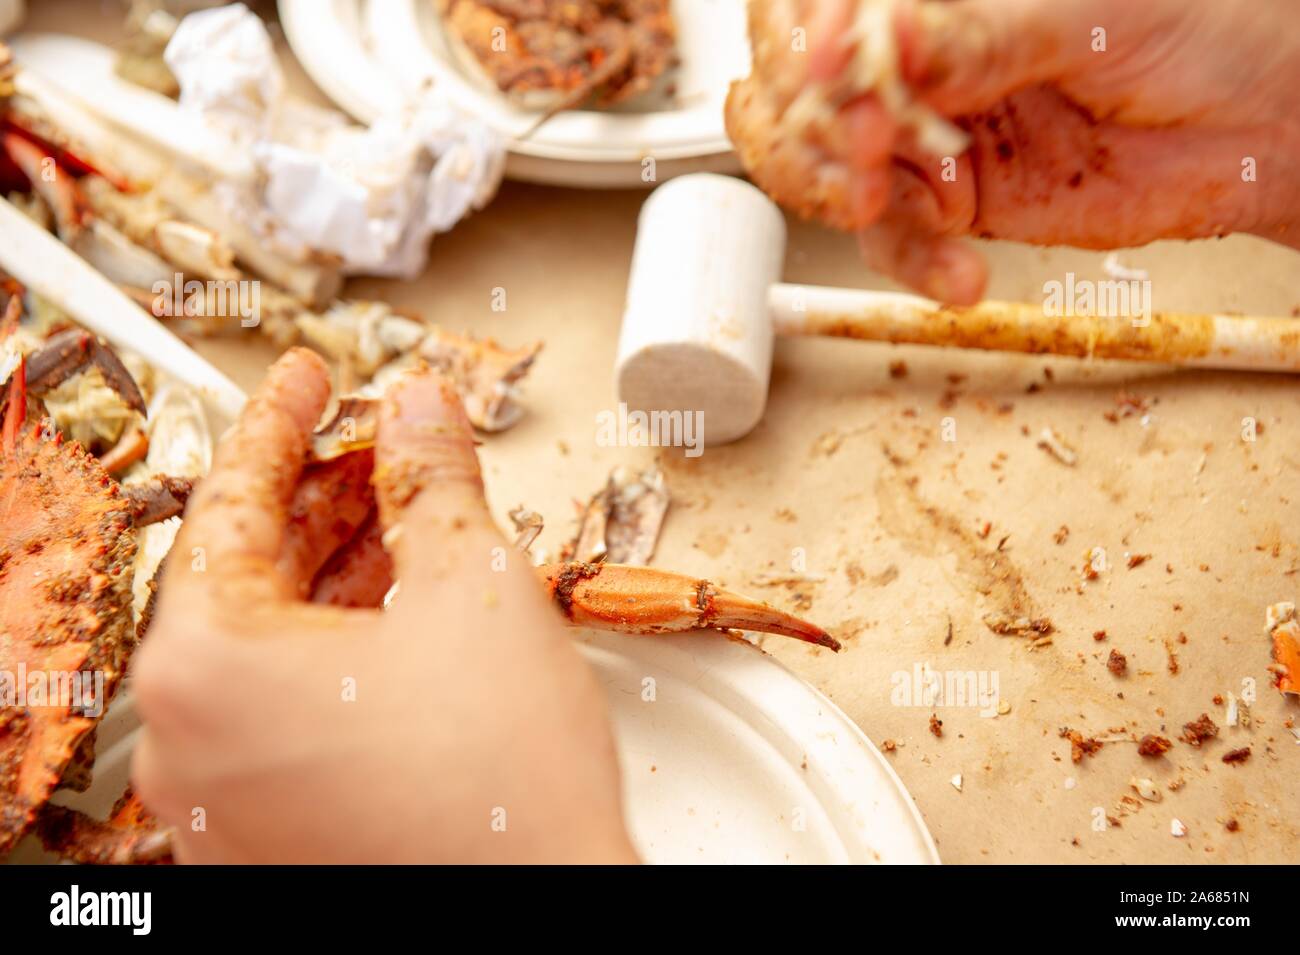 Students participate in a crab feast with the traditional Maryland dish of blue crabs, on the Homewood Campus of the Johns Hopkins University in Baltimore, Maryland, May 21, 2010. From the Homewood Photography collection. () Stock Photo